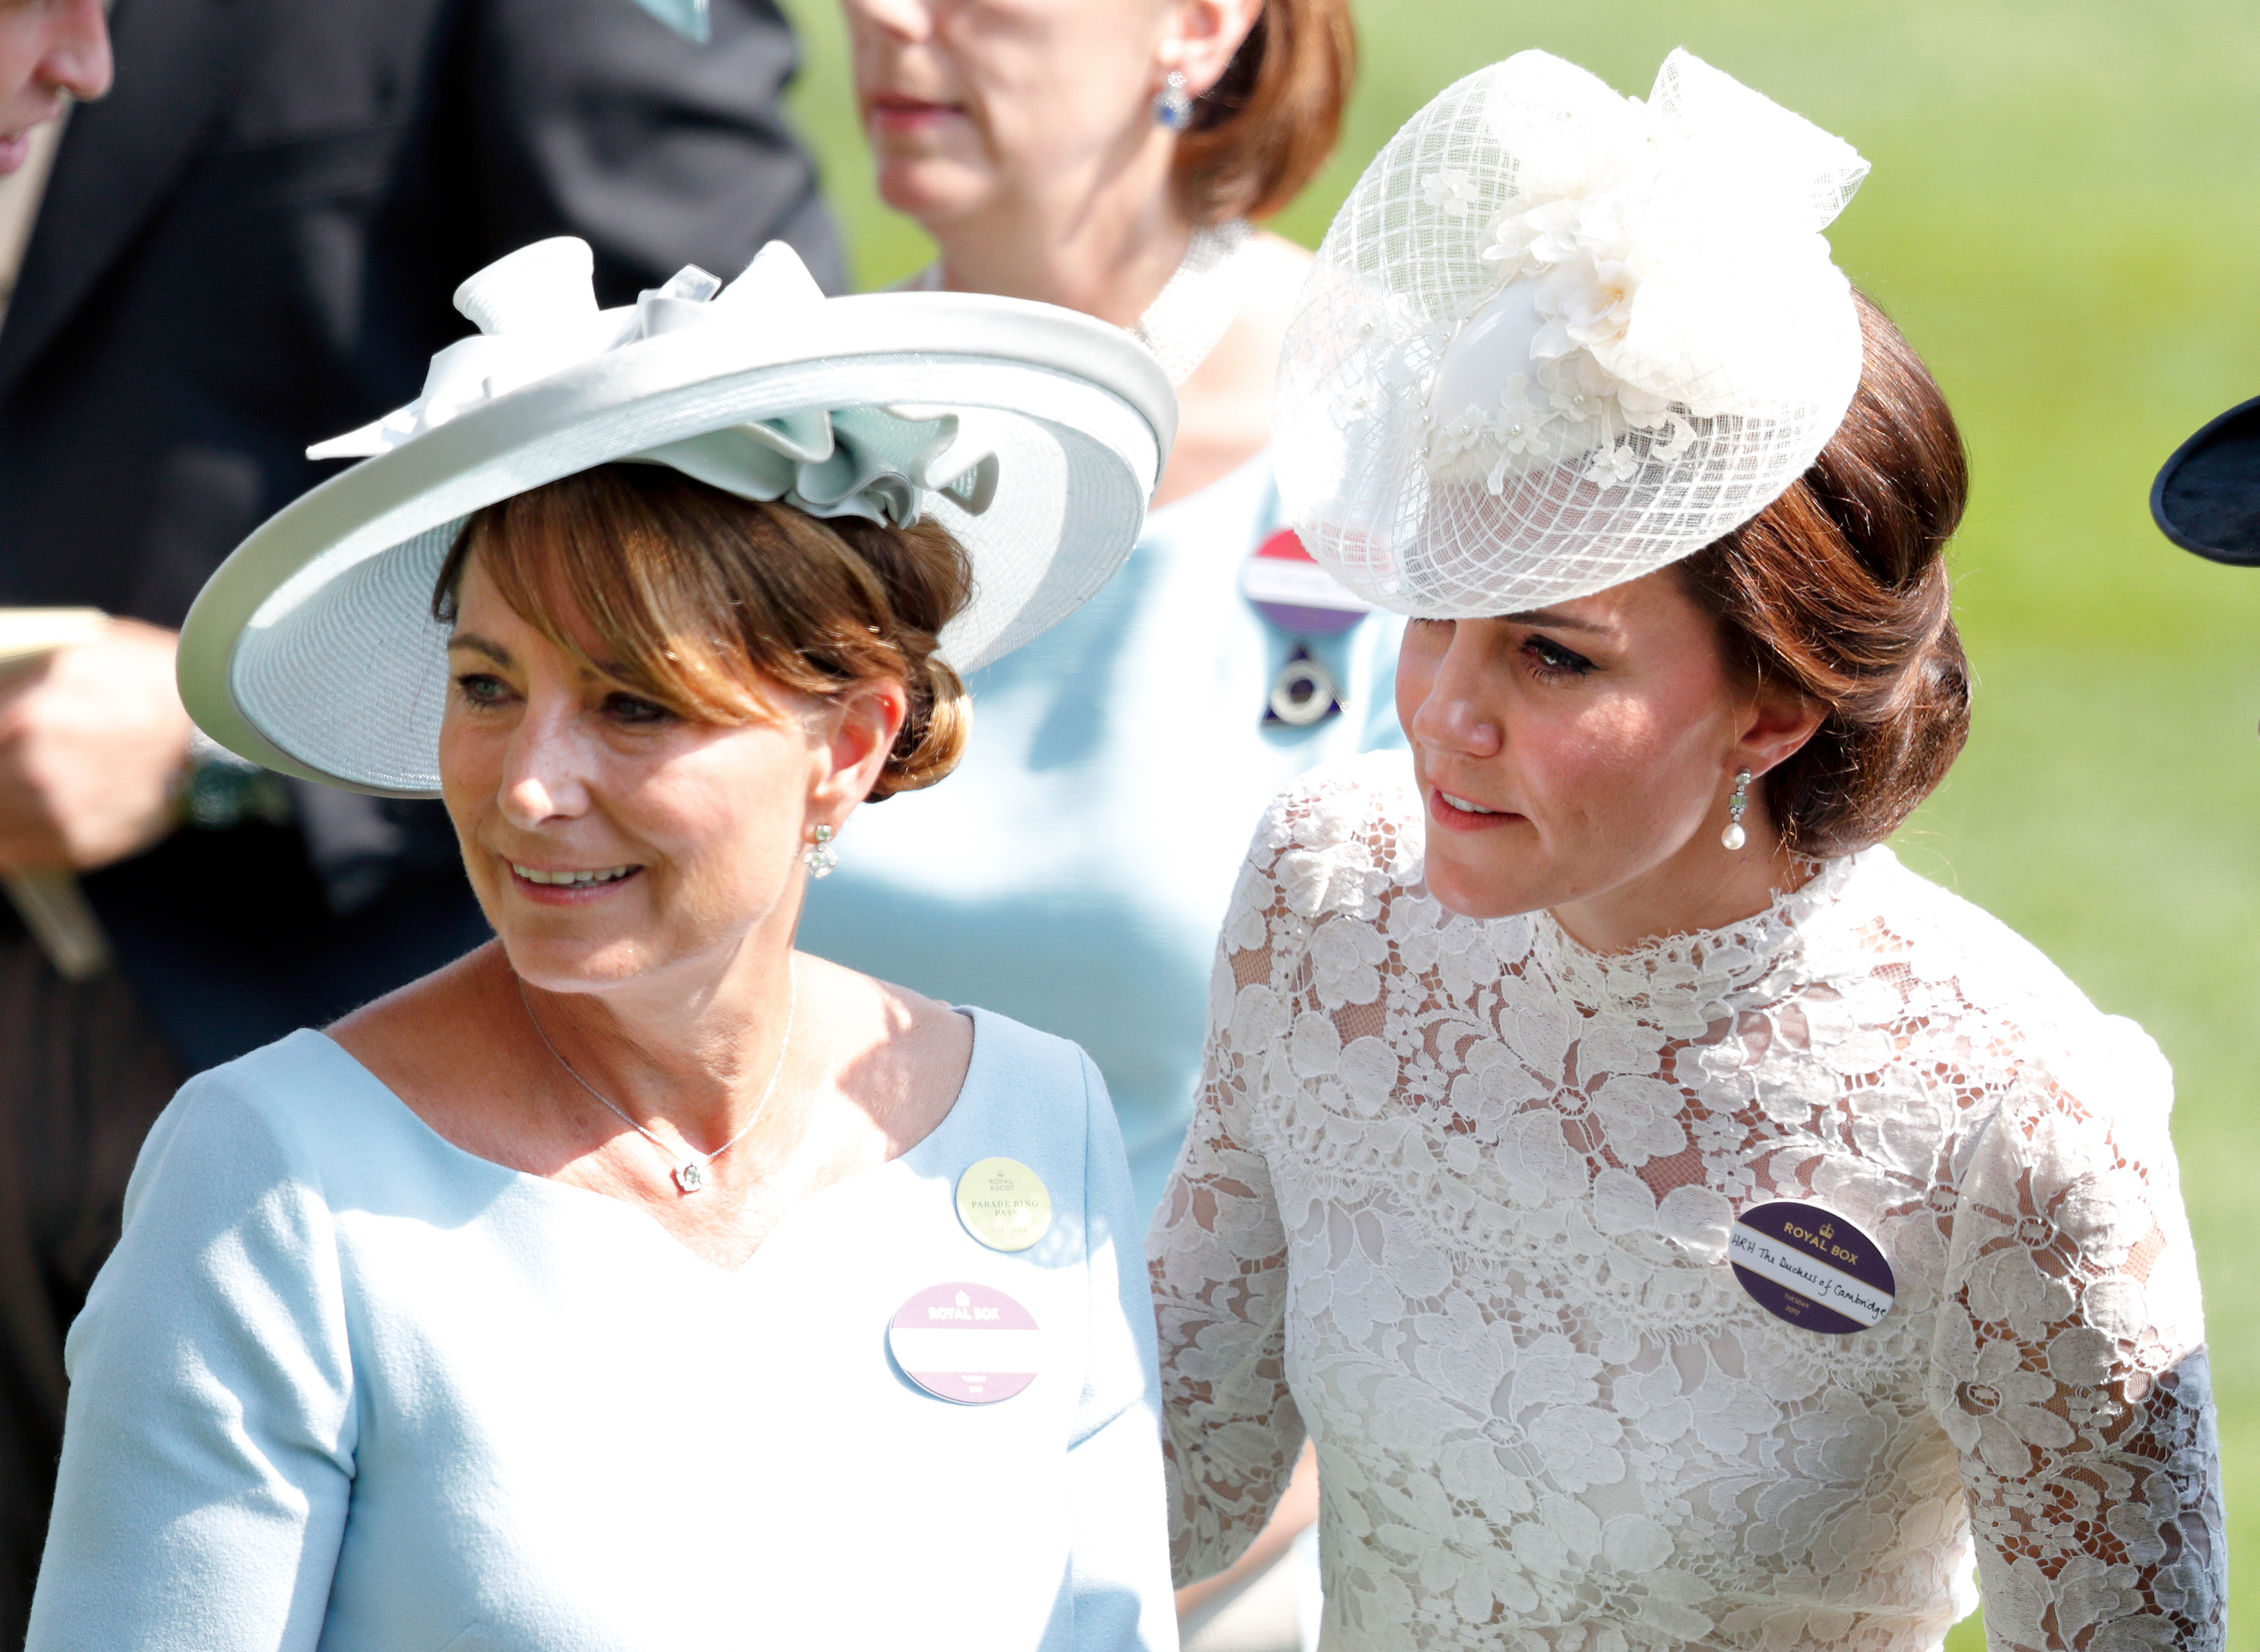 Carole Middleton und Prinzessin Catherine beim Royal Ascot in Ascot, England am 20. Juni 2017 | Quelle: Getty Images